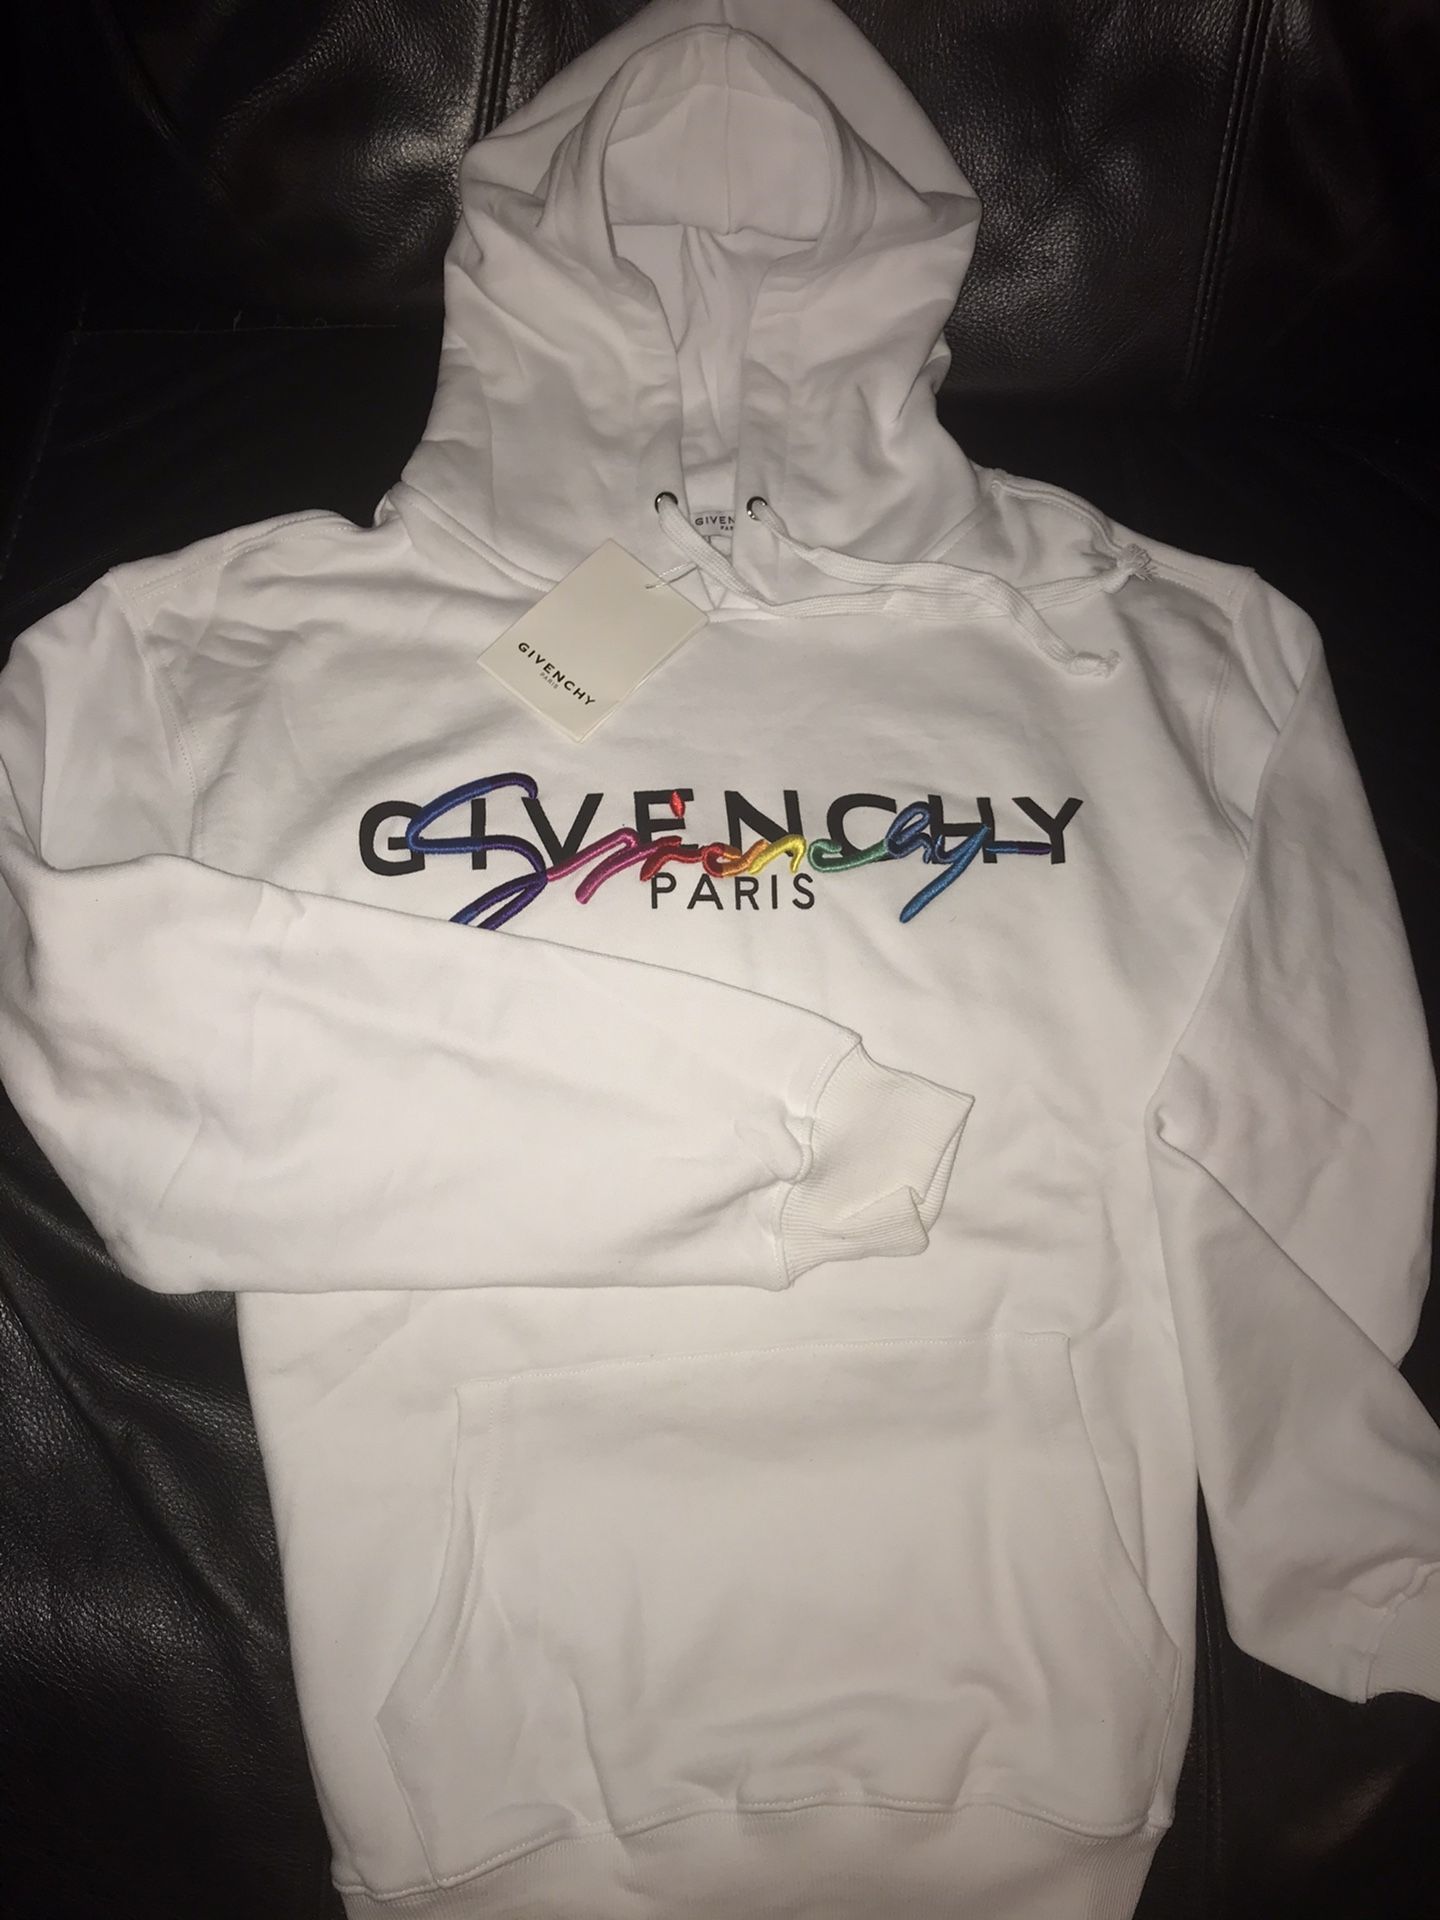 GlVENCHY Hoodie. Size large